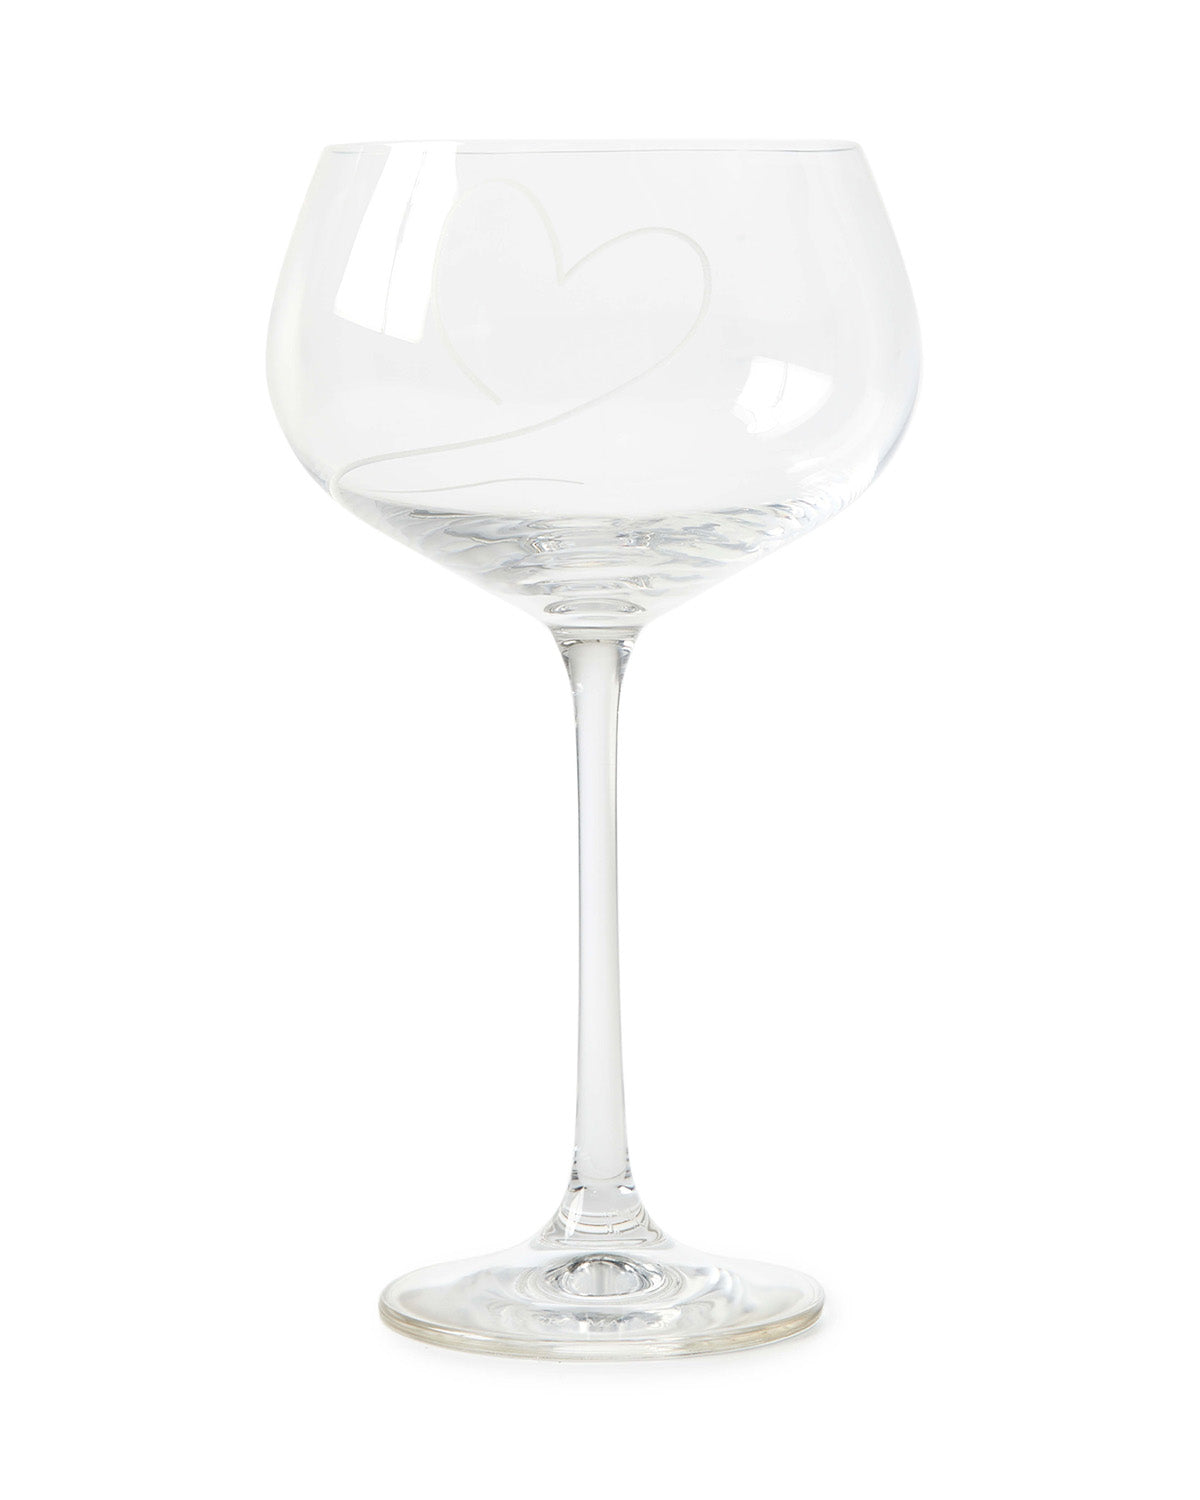 White wine glass with a hand painted heart by Riviera Maison